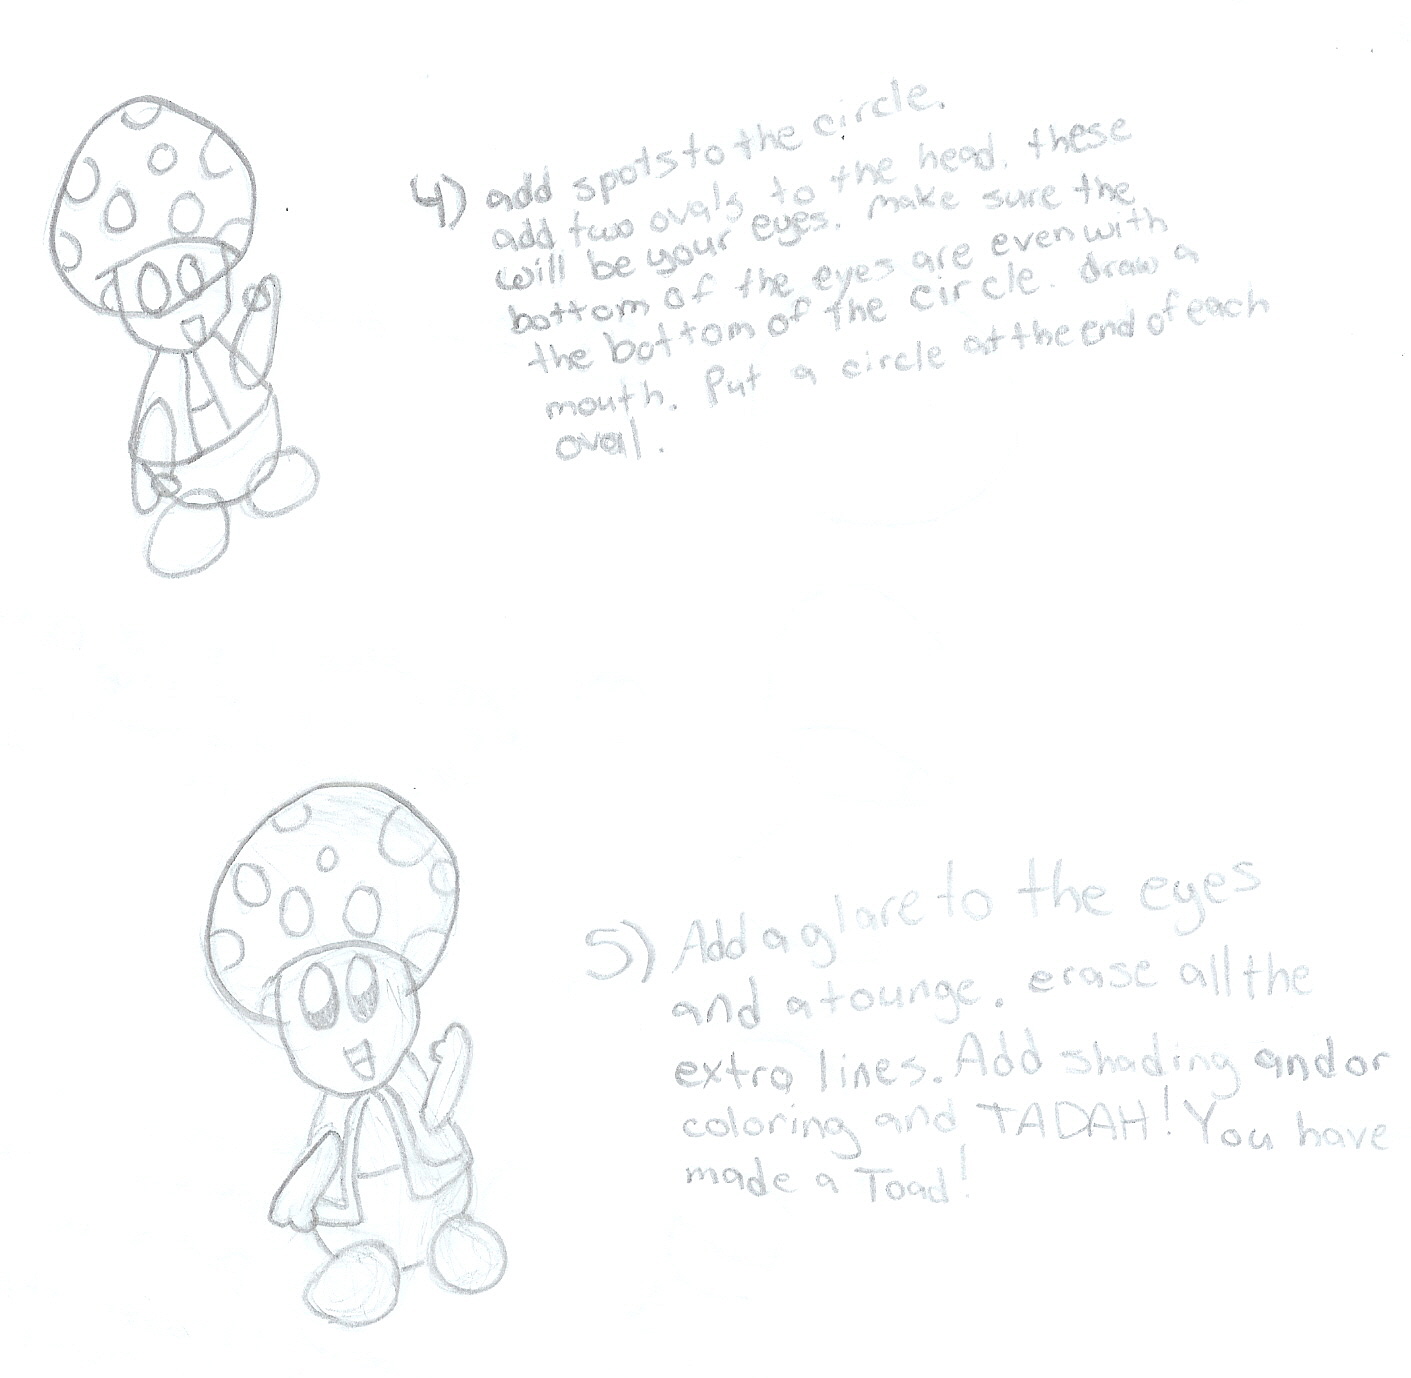 Toad tutorial Page 2 by pacmaster2000